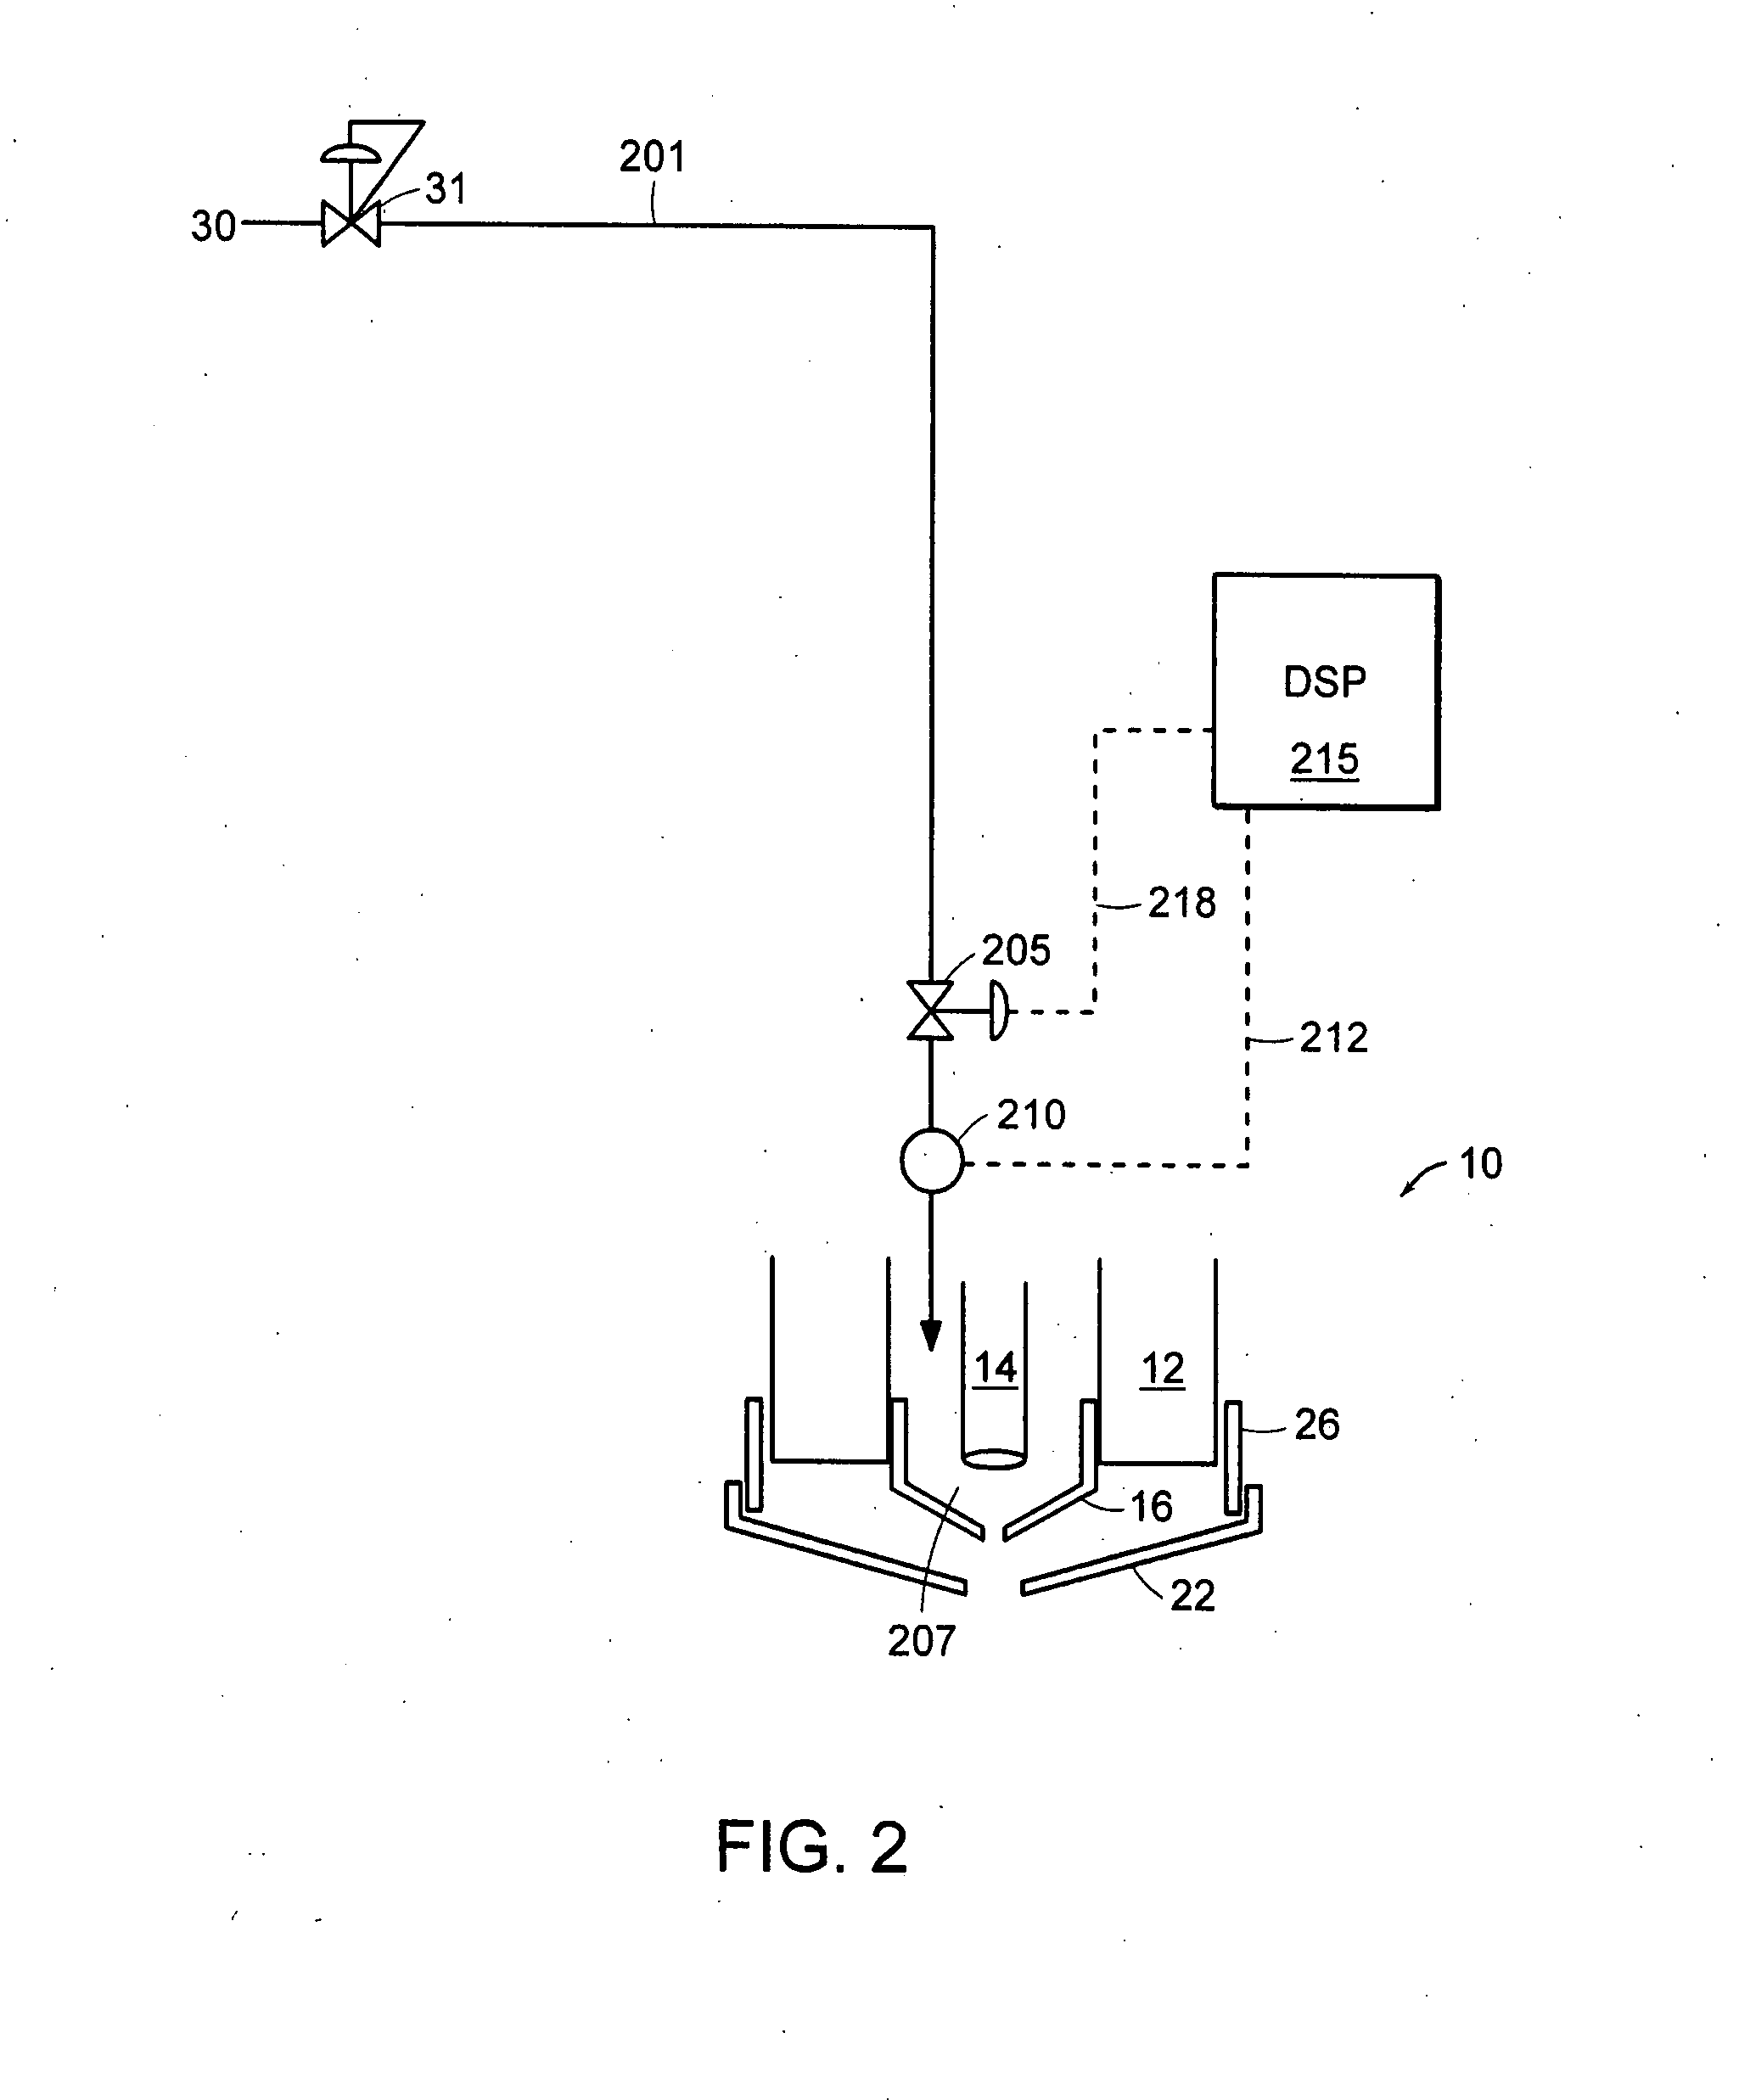 Method and apparatus for automatic gas control for a plasma arc torch